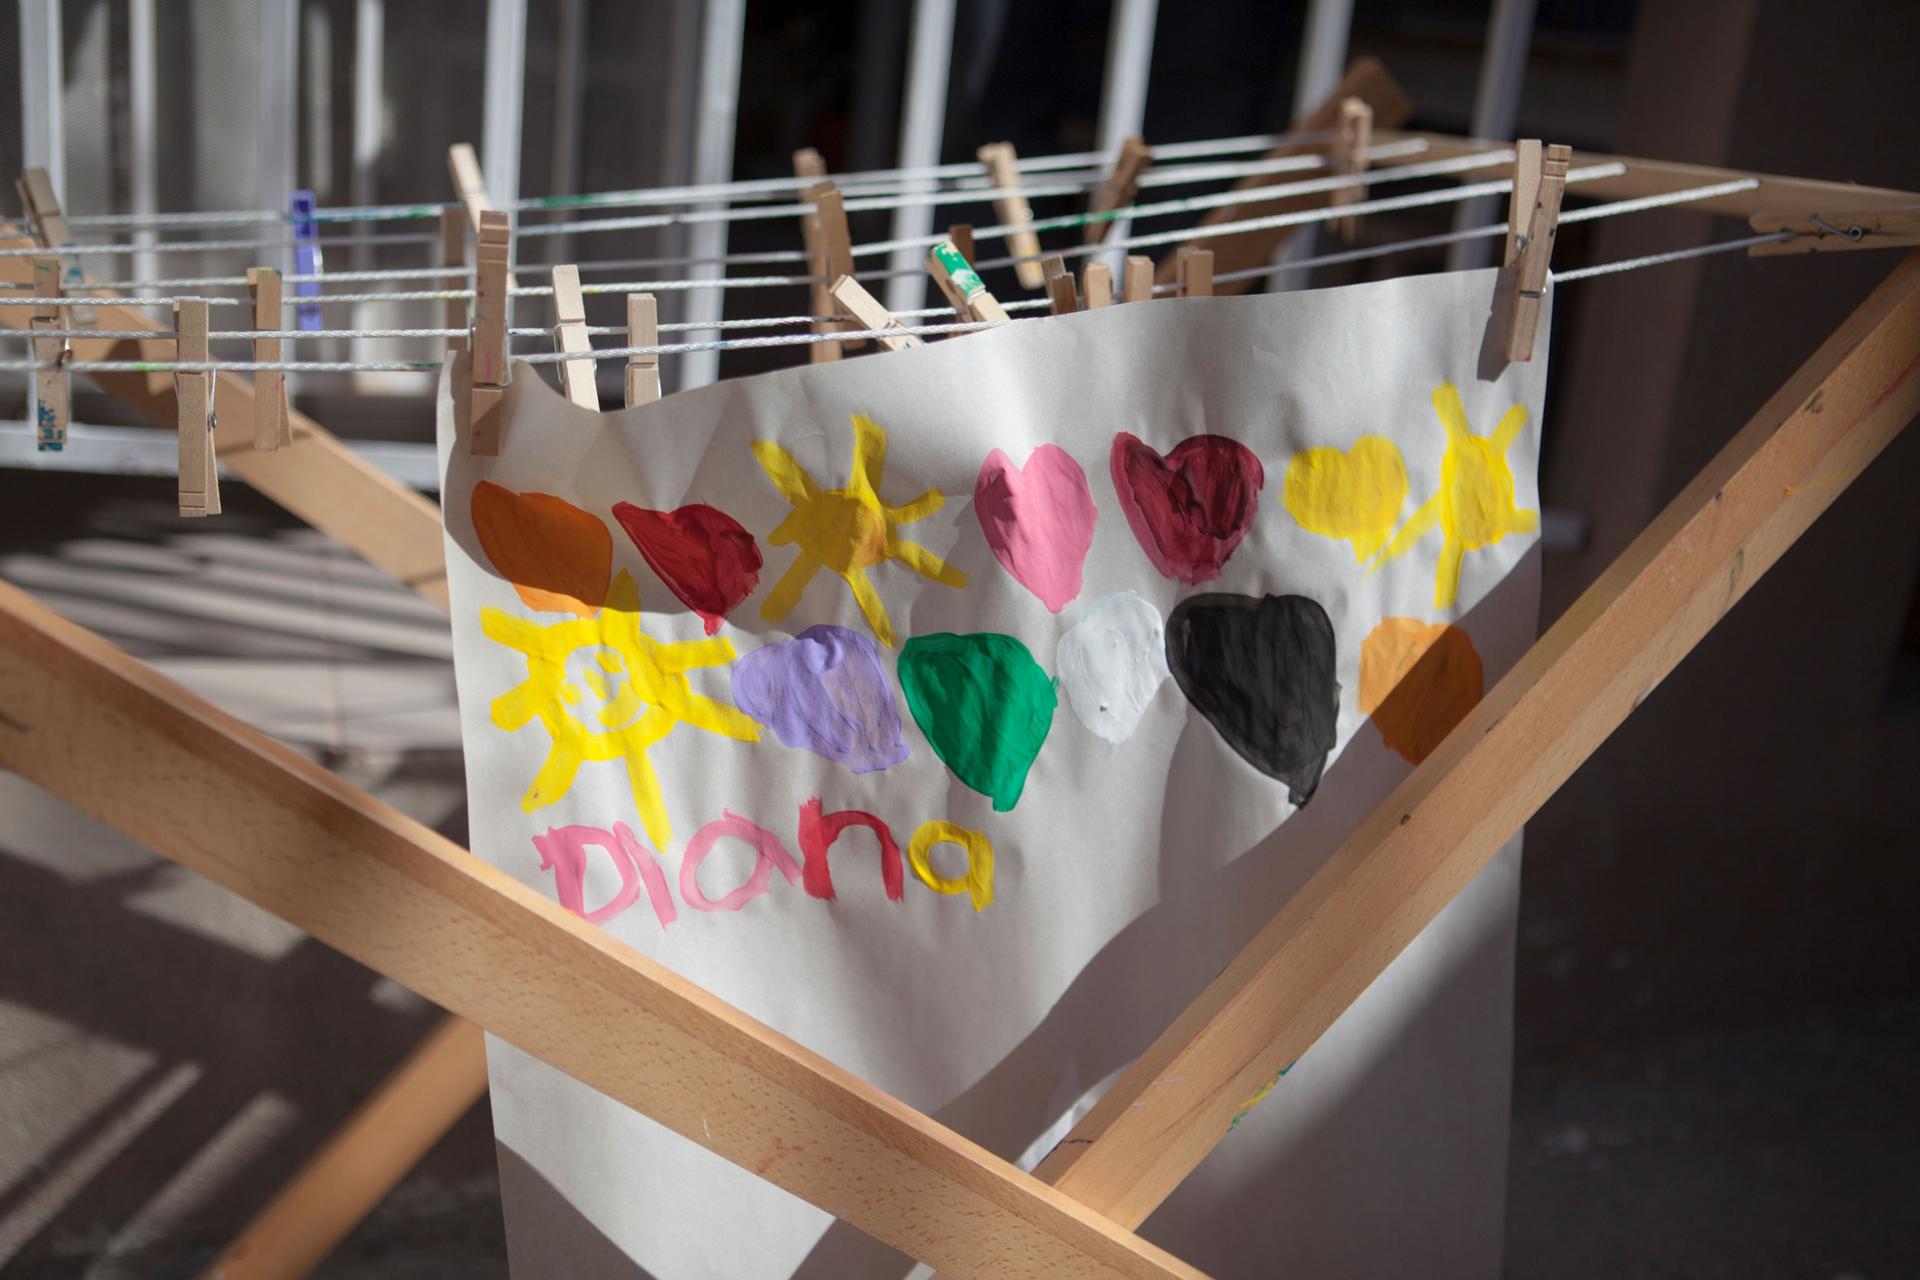 A white paper is shown with colorful hearts painted on it hanging from a wooden rack.